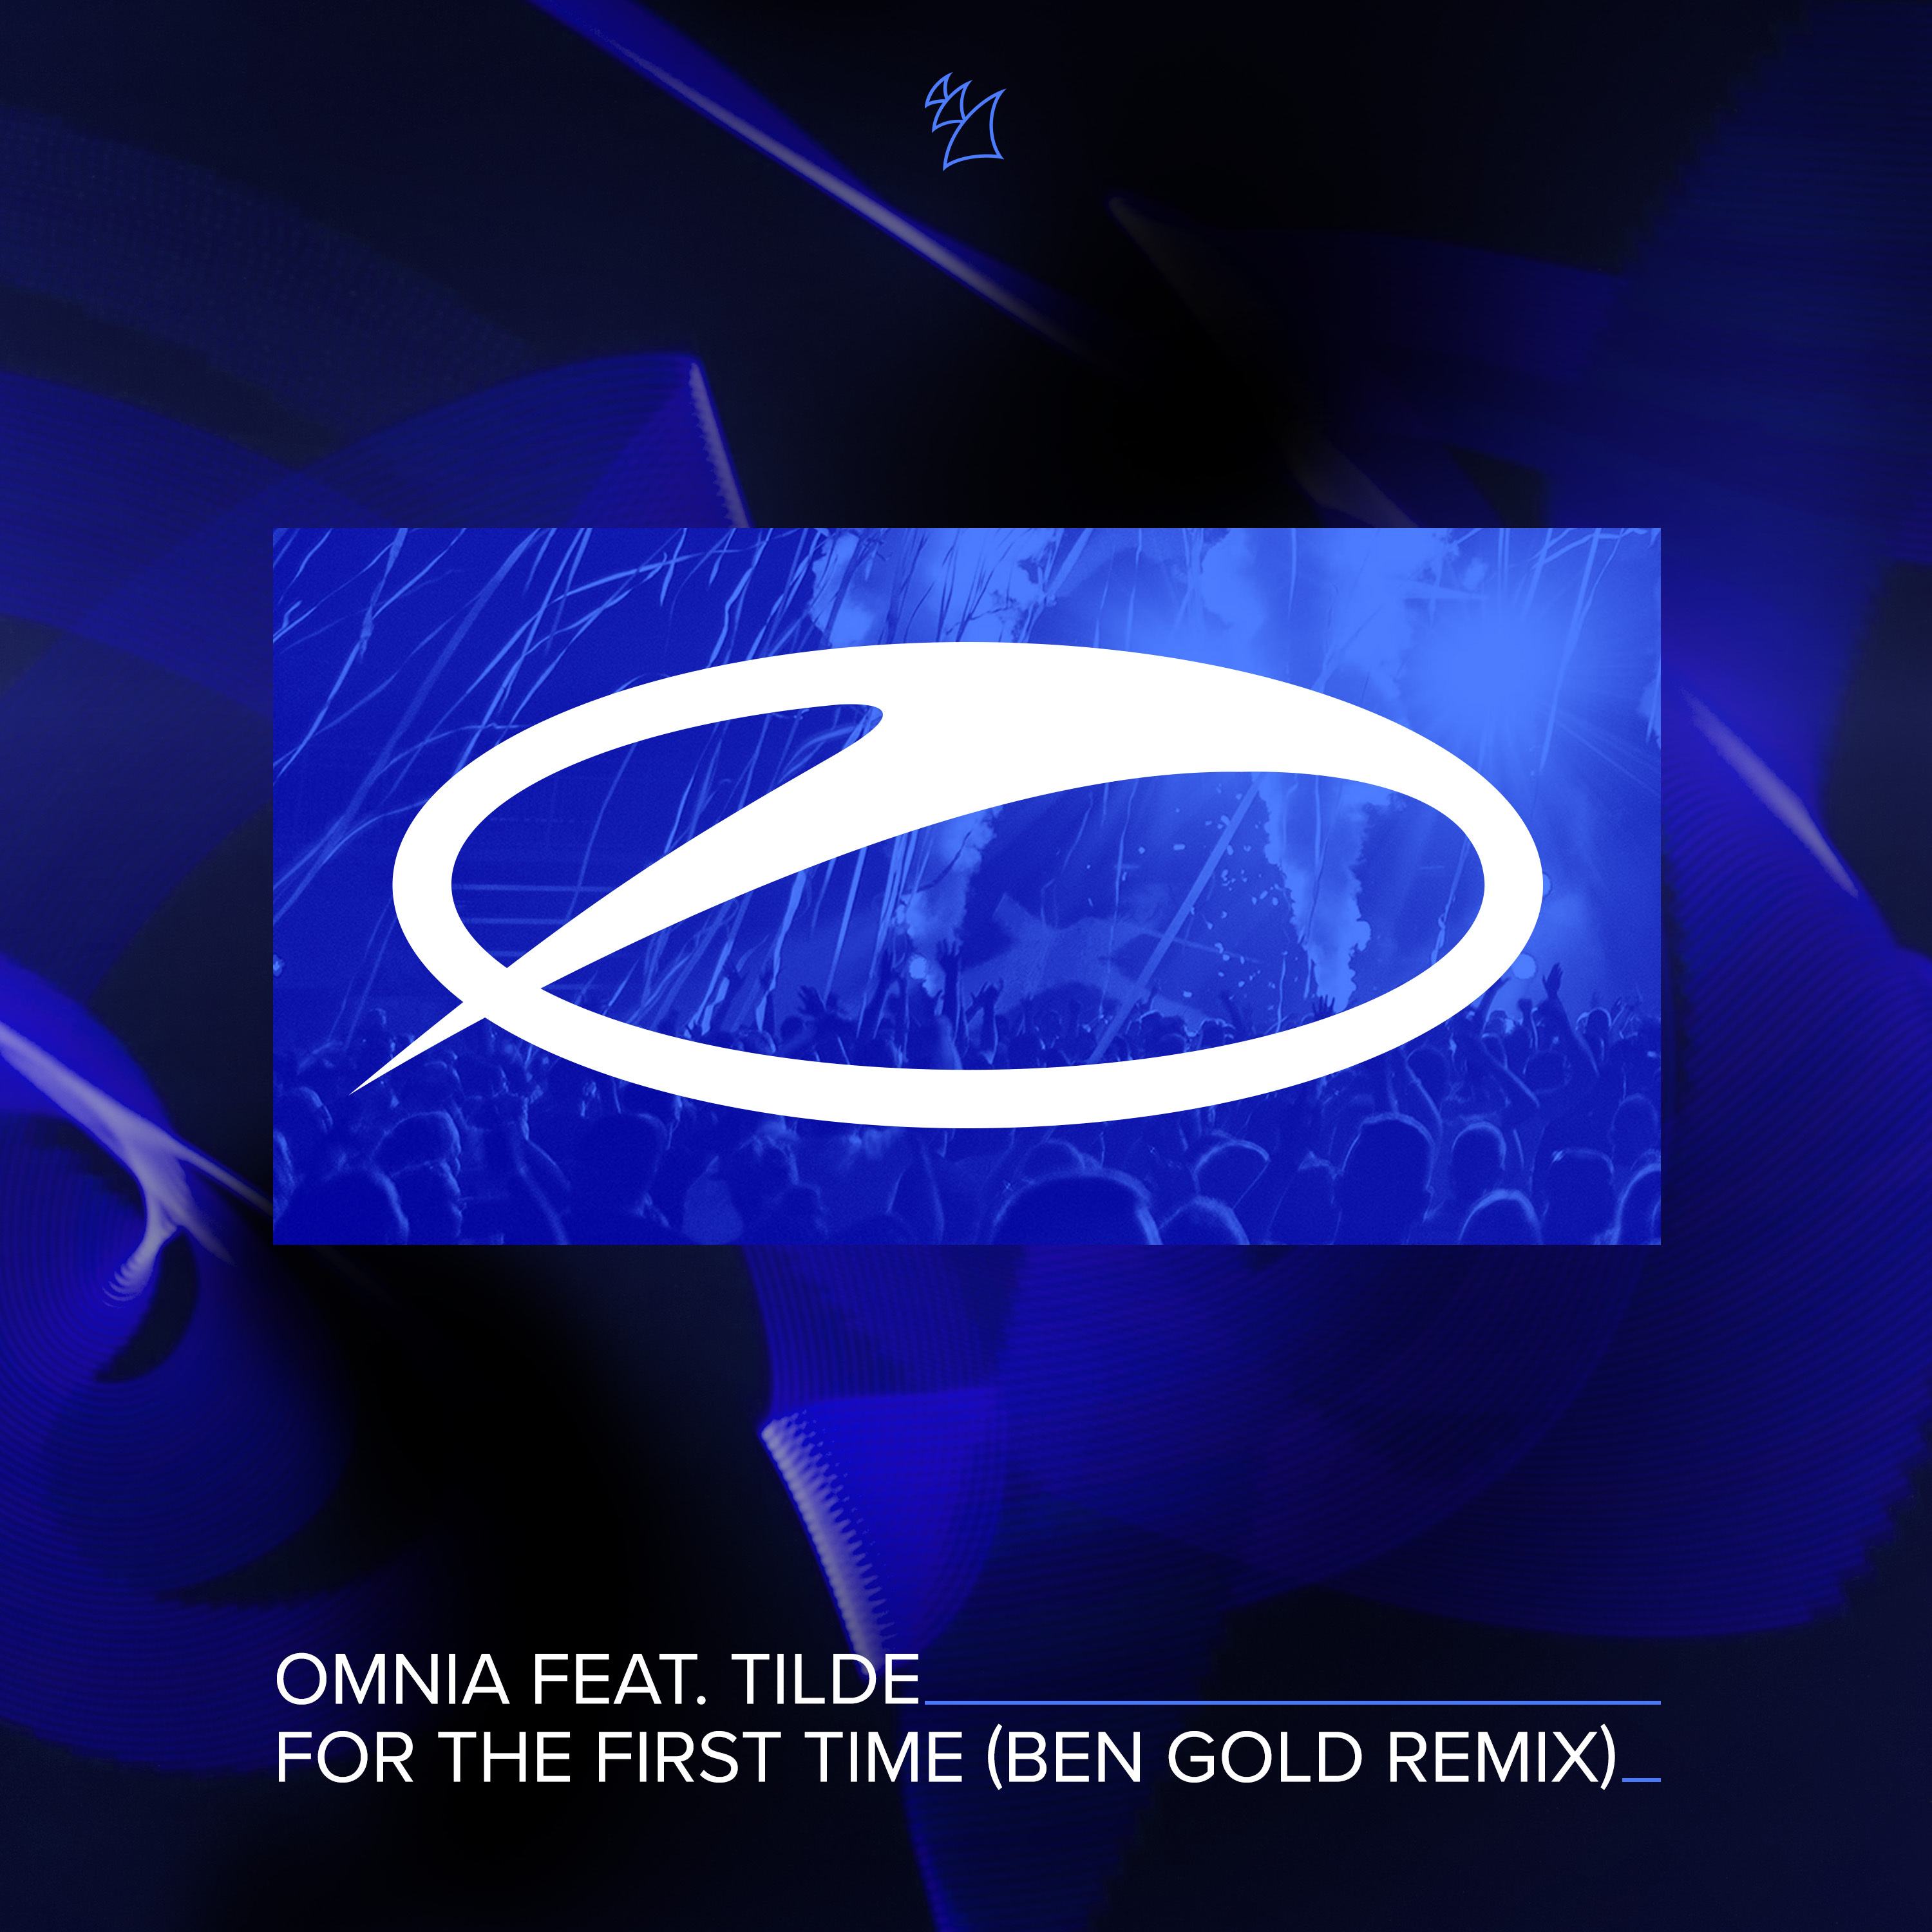 For The First Time (Ben Gold Remix)